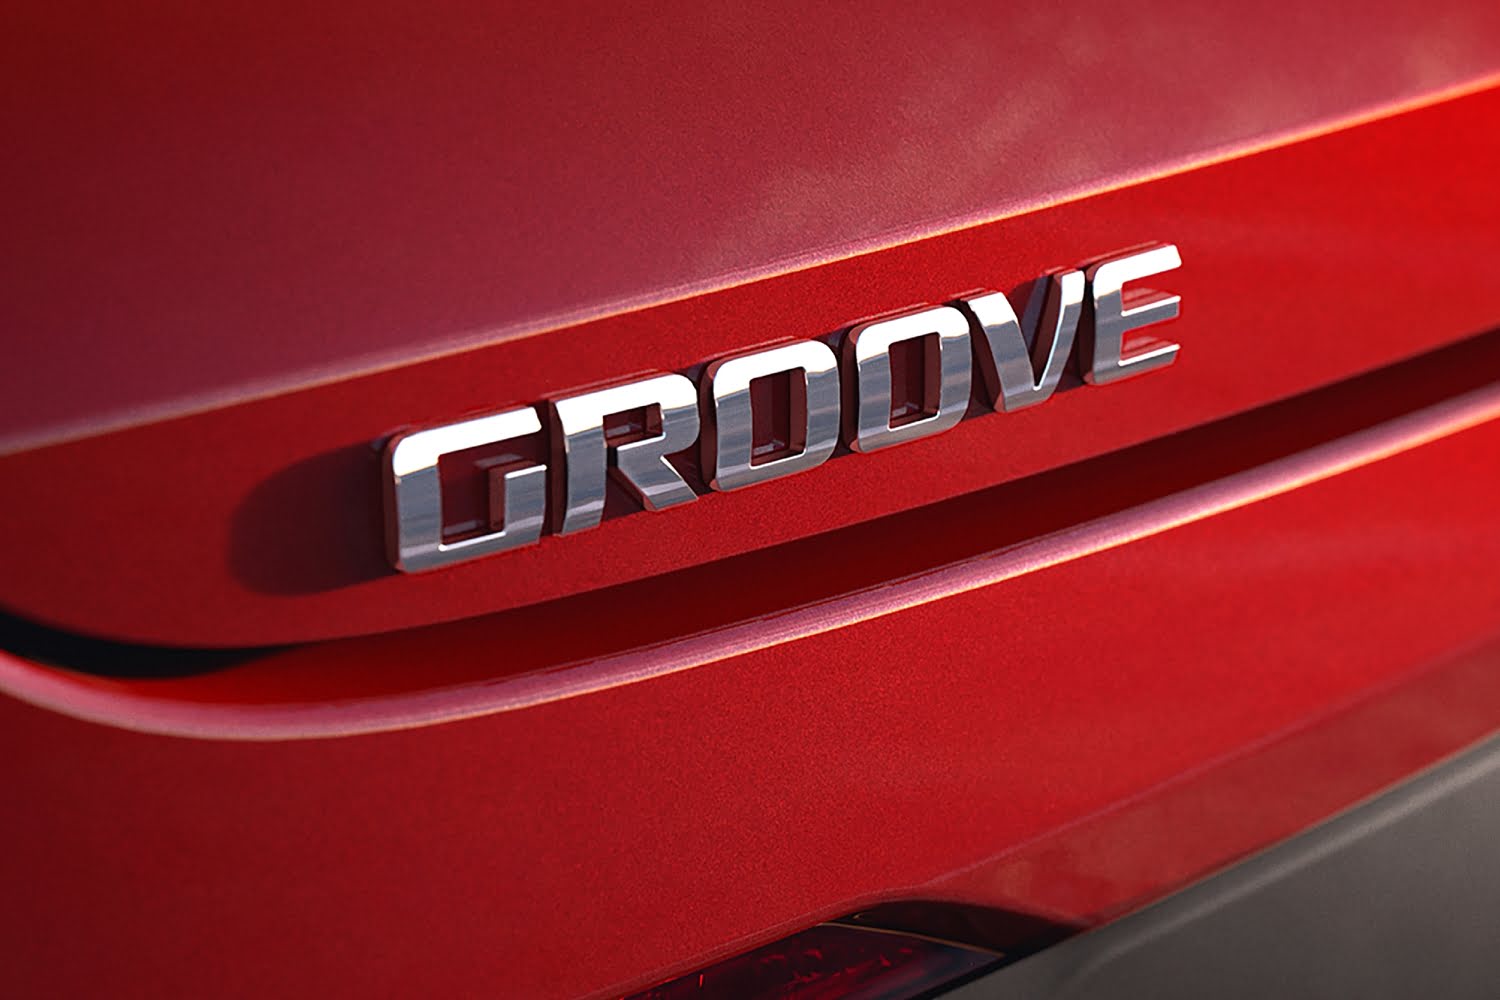 Chevrolet Groove Info, Details, Specs, Pictures, Wiki